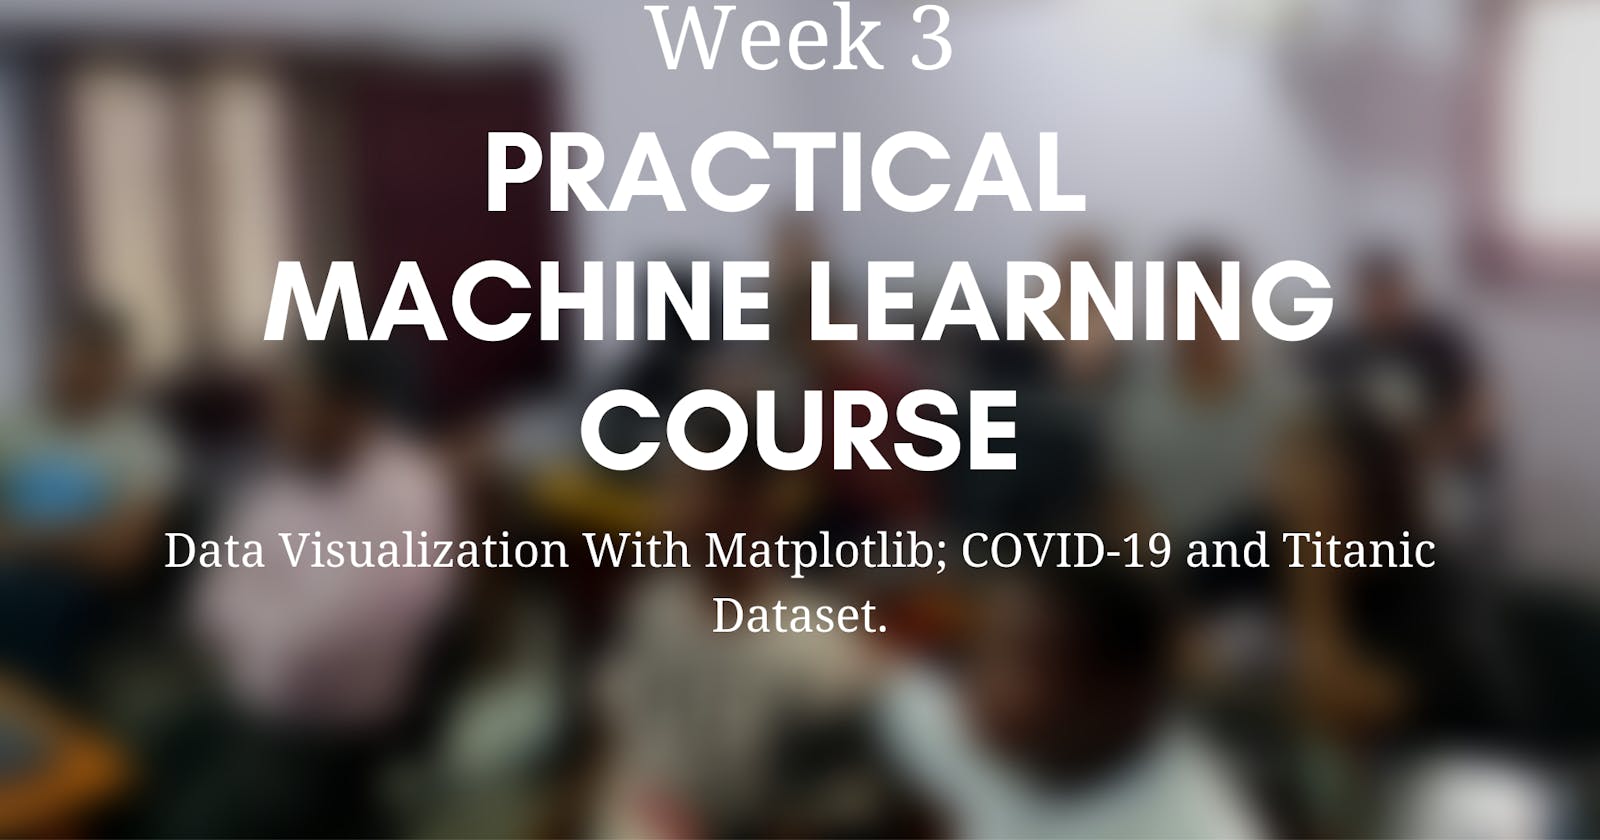 Practical Machine Learning Course Week 3 Highlights; Data Visualization With Matplotlib